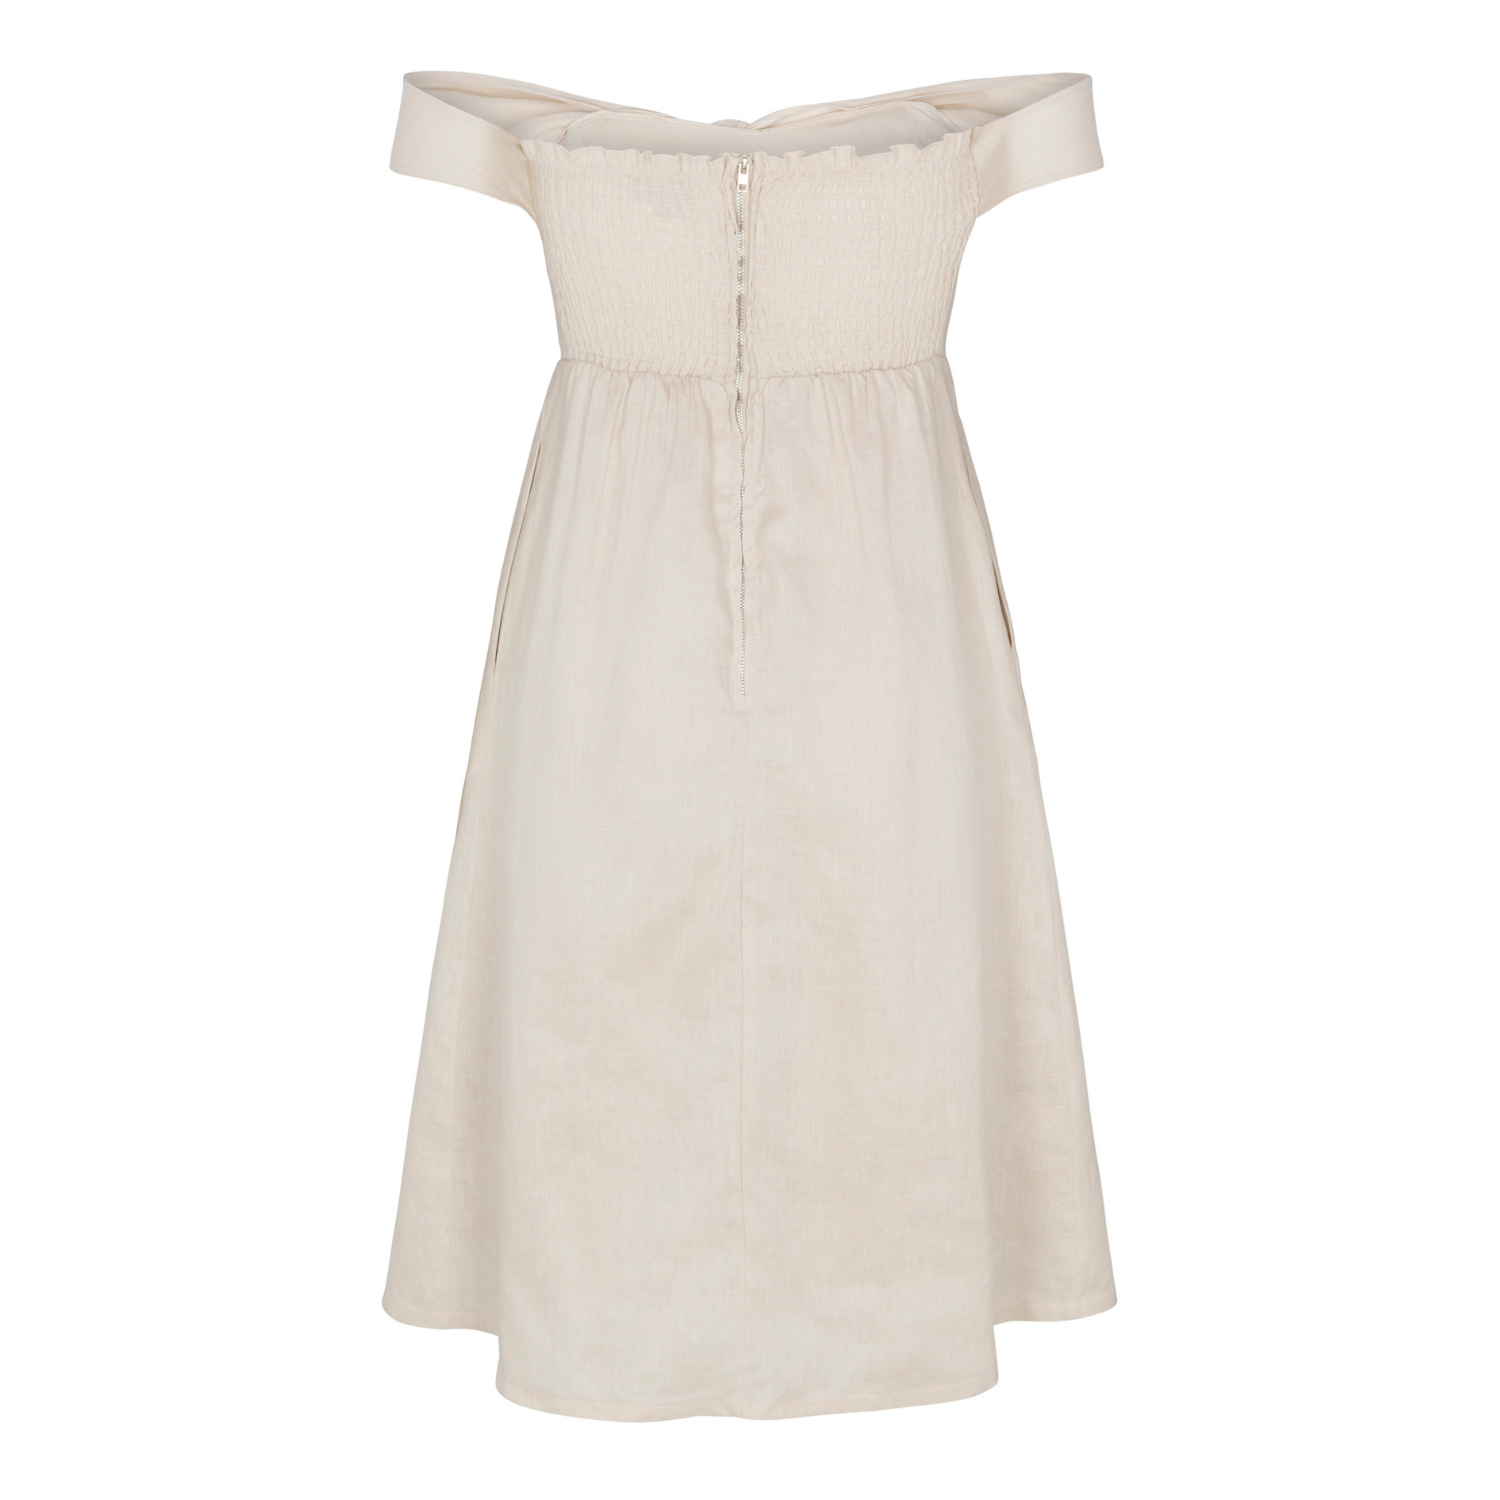 The Como Dress in Sand